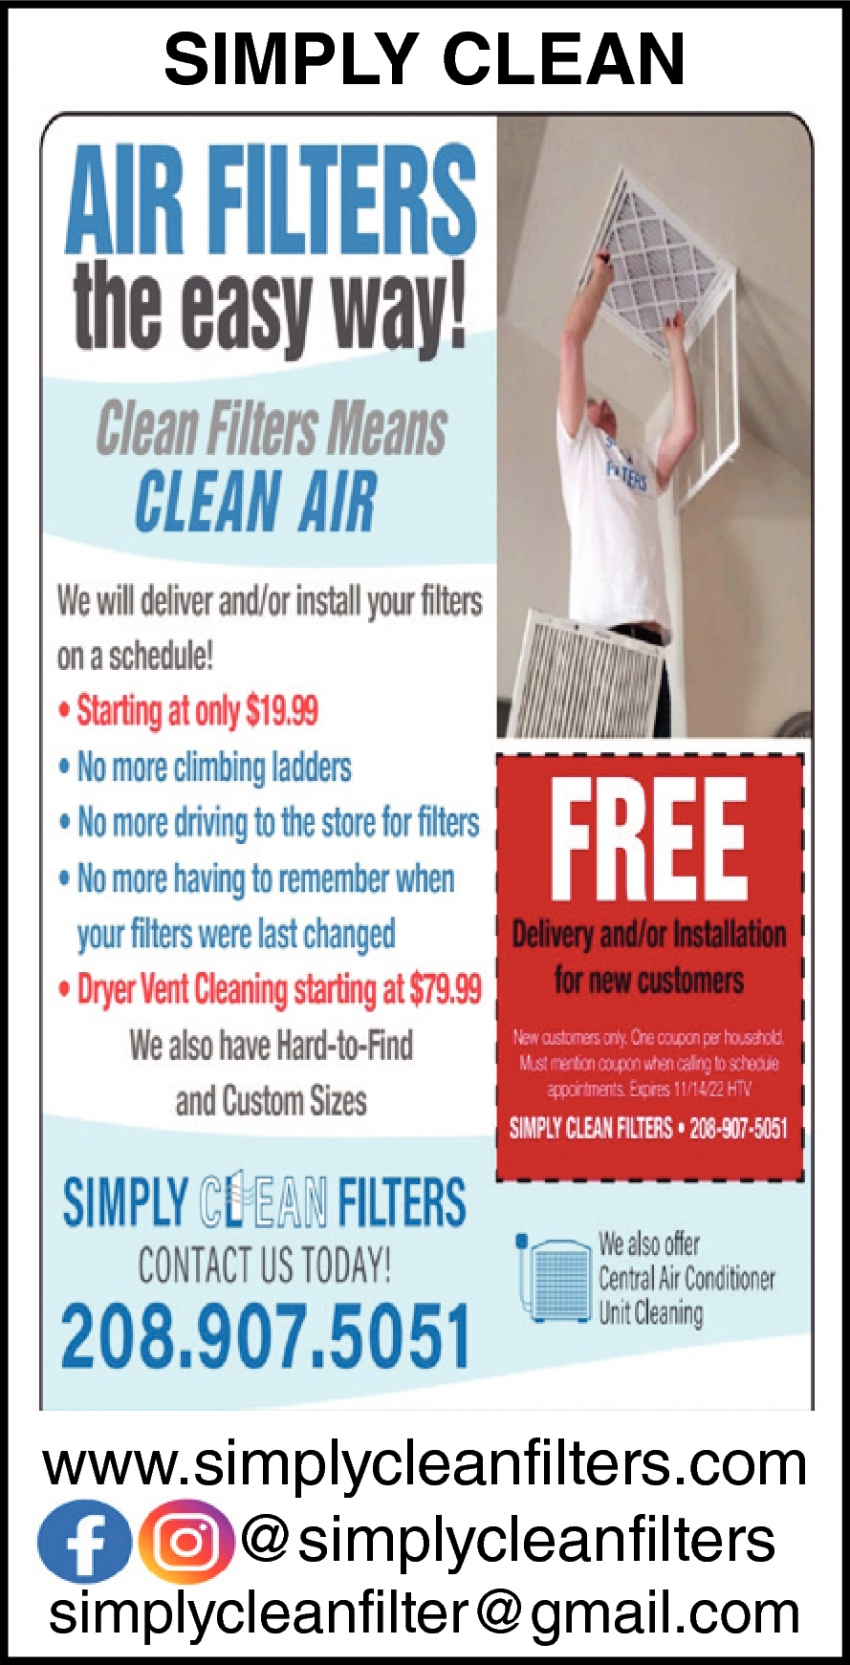 Air Filters the Easy Way!